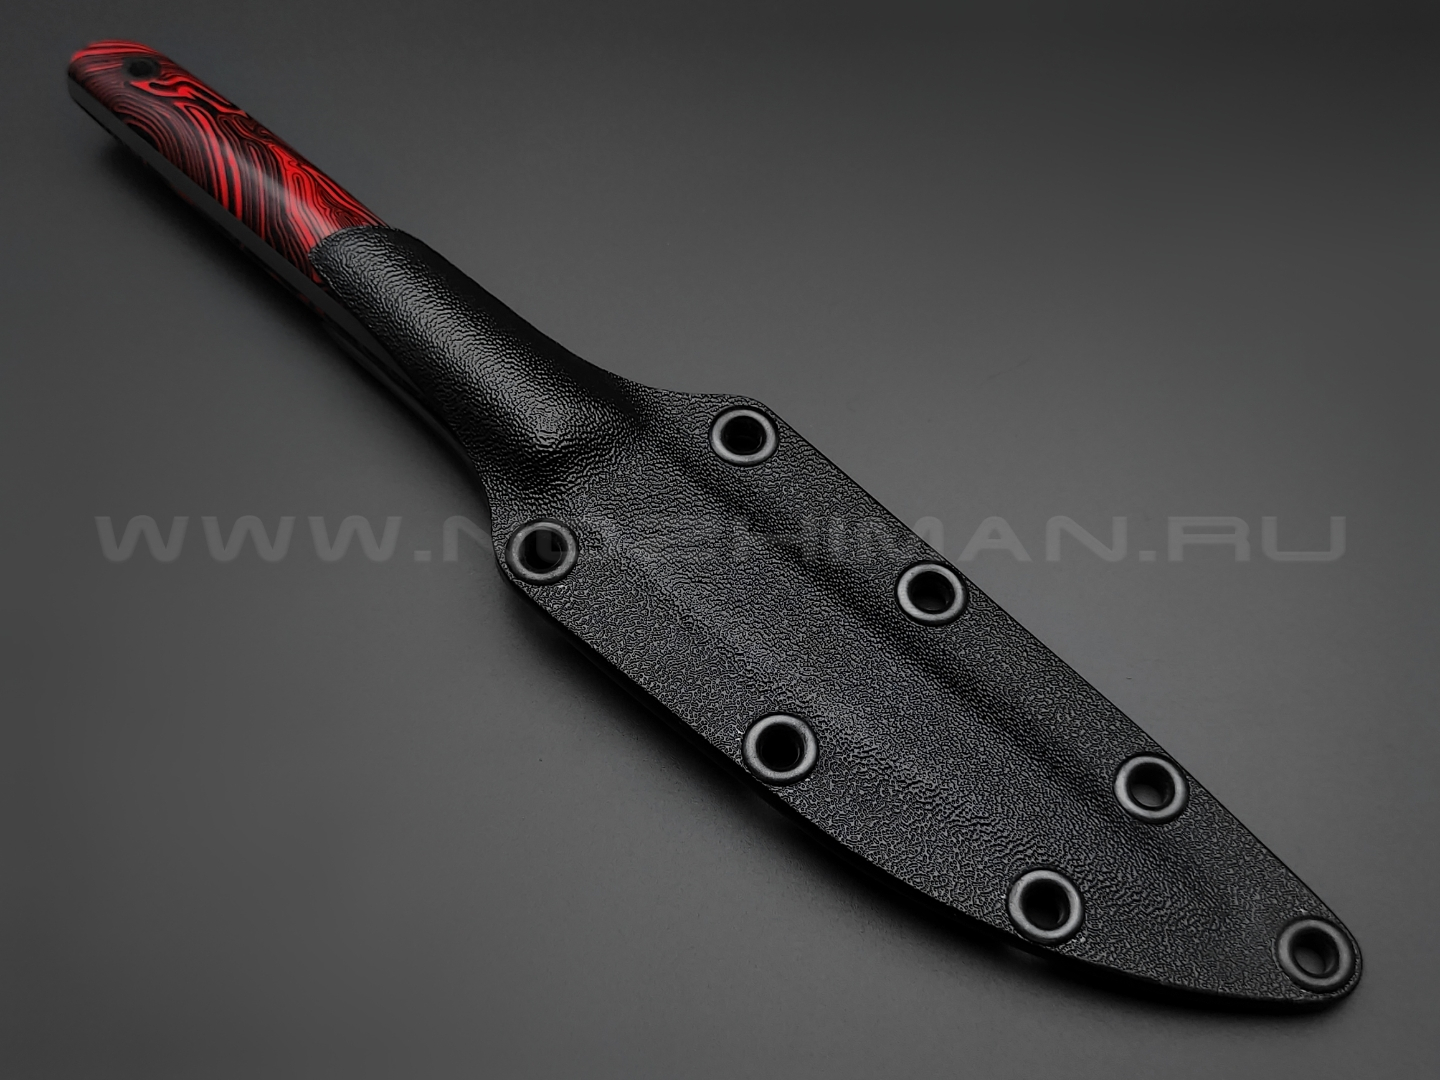 Neyris Knives нож Acus сталь CPM 3V, рукоять Chaotic G10 red & black